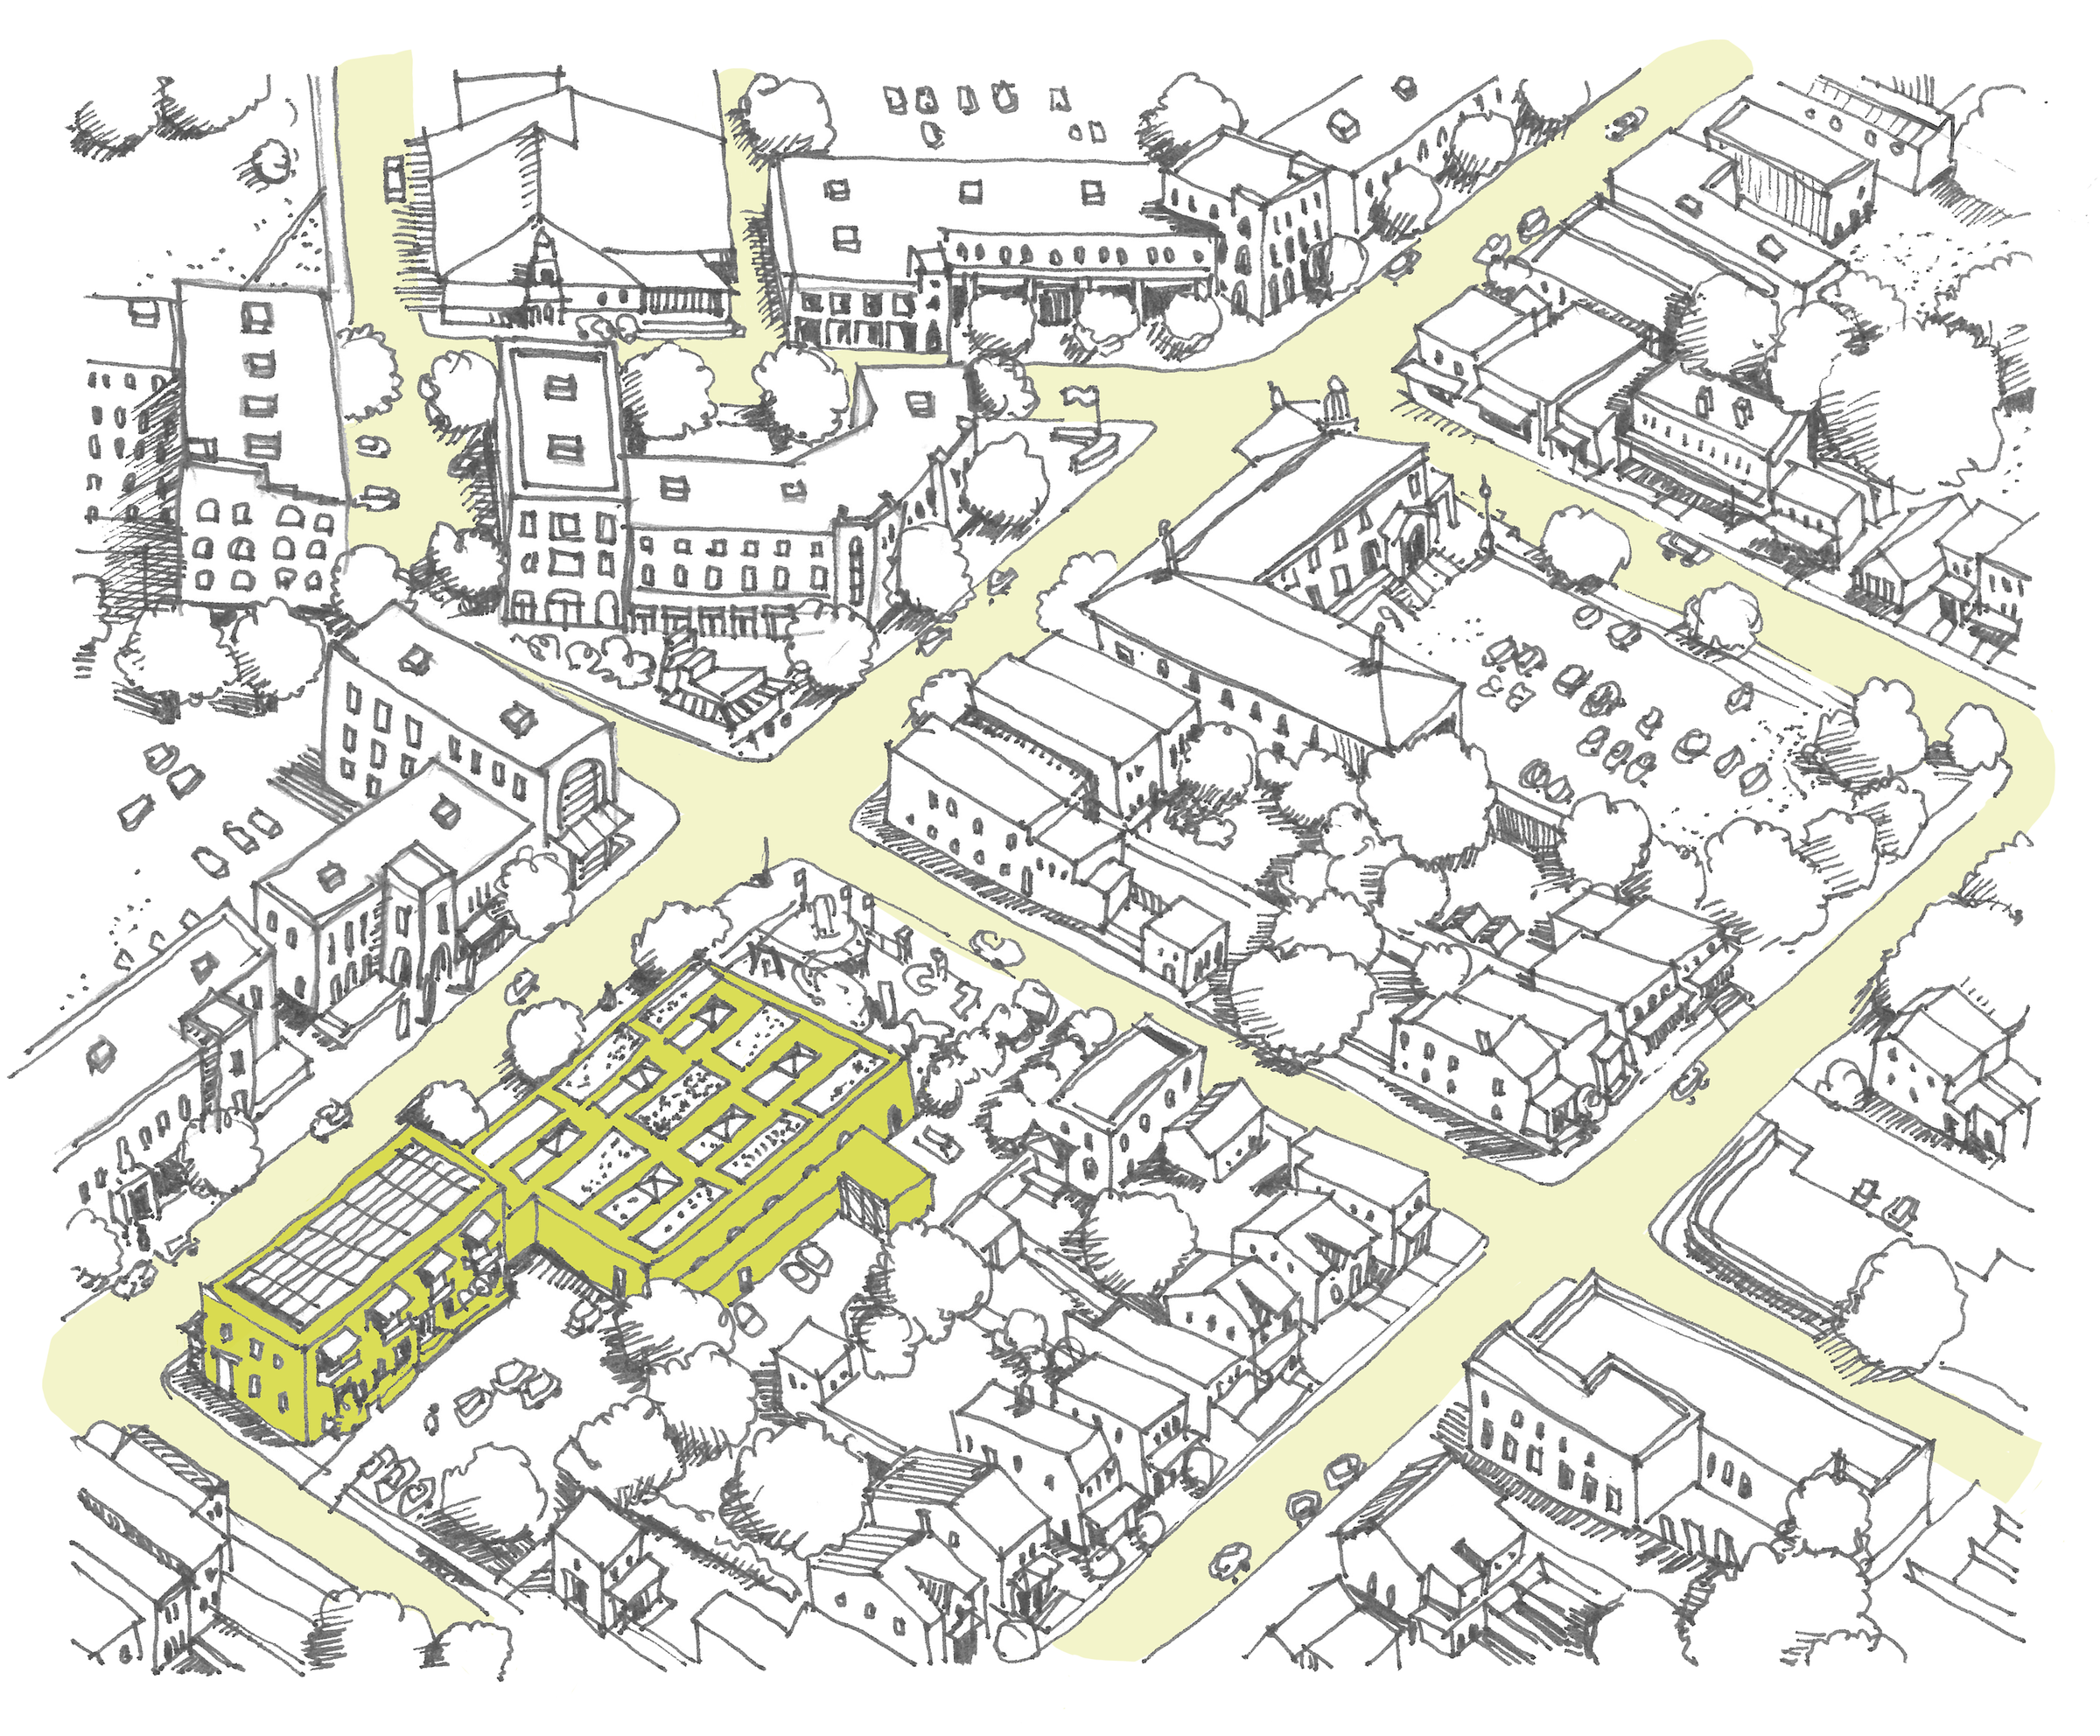 The importance of location, illustration from 'A Design Guide for Older Women's Housing'